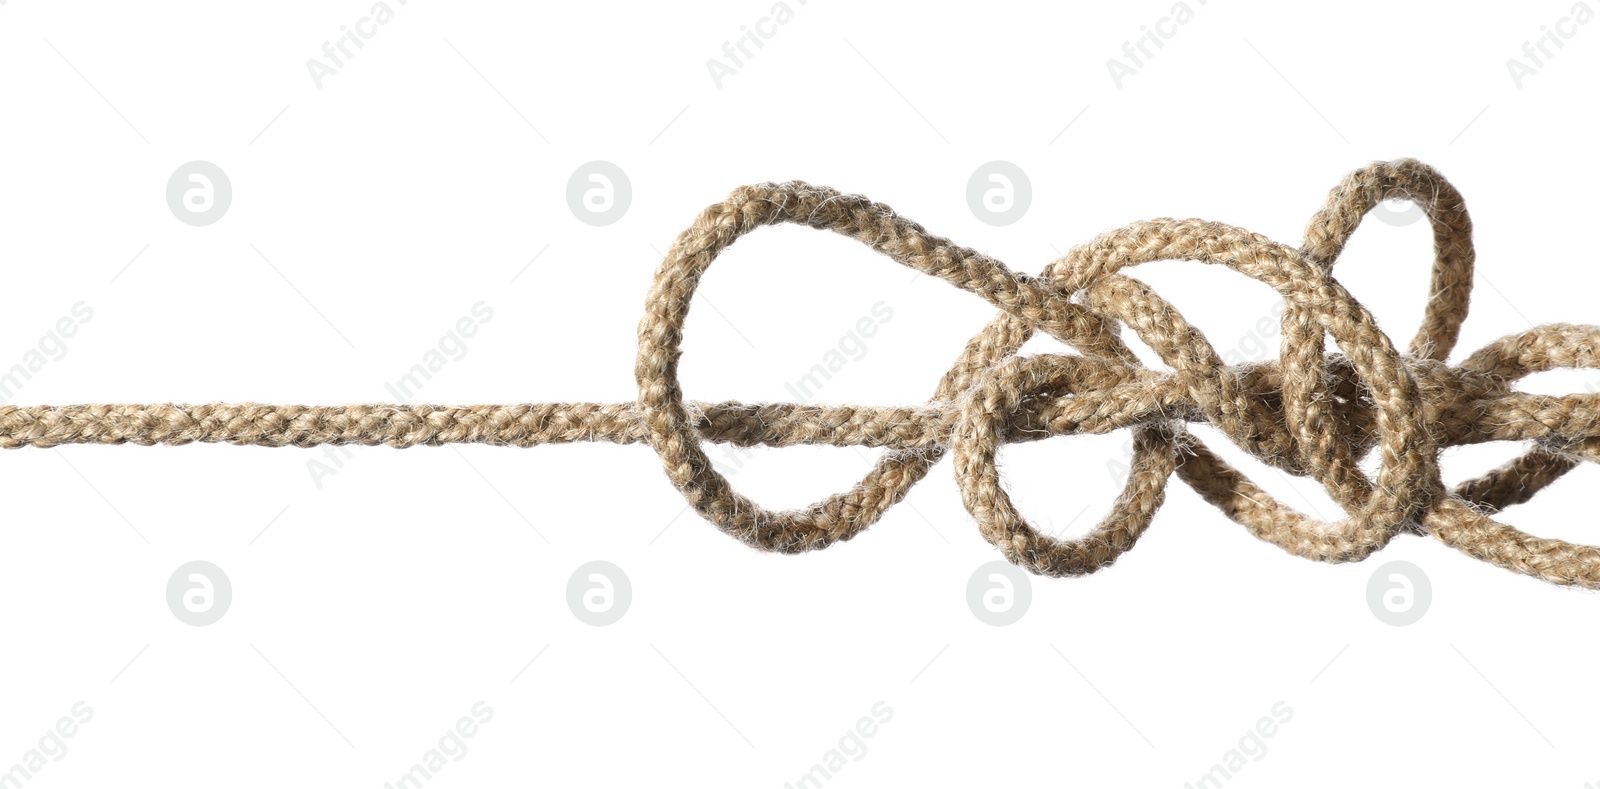 Photo of Hemp rope with knots isolated on white